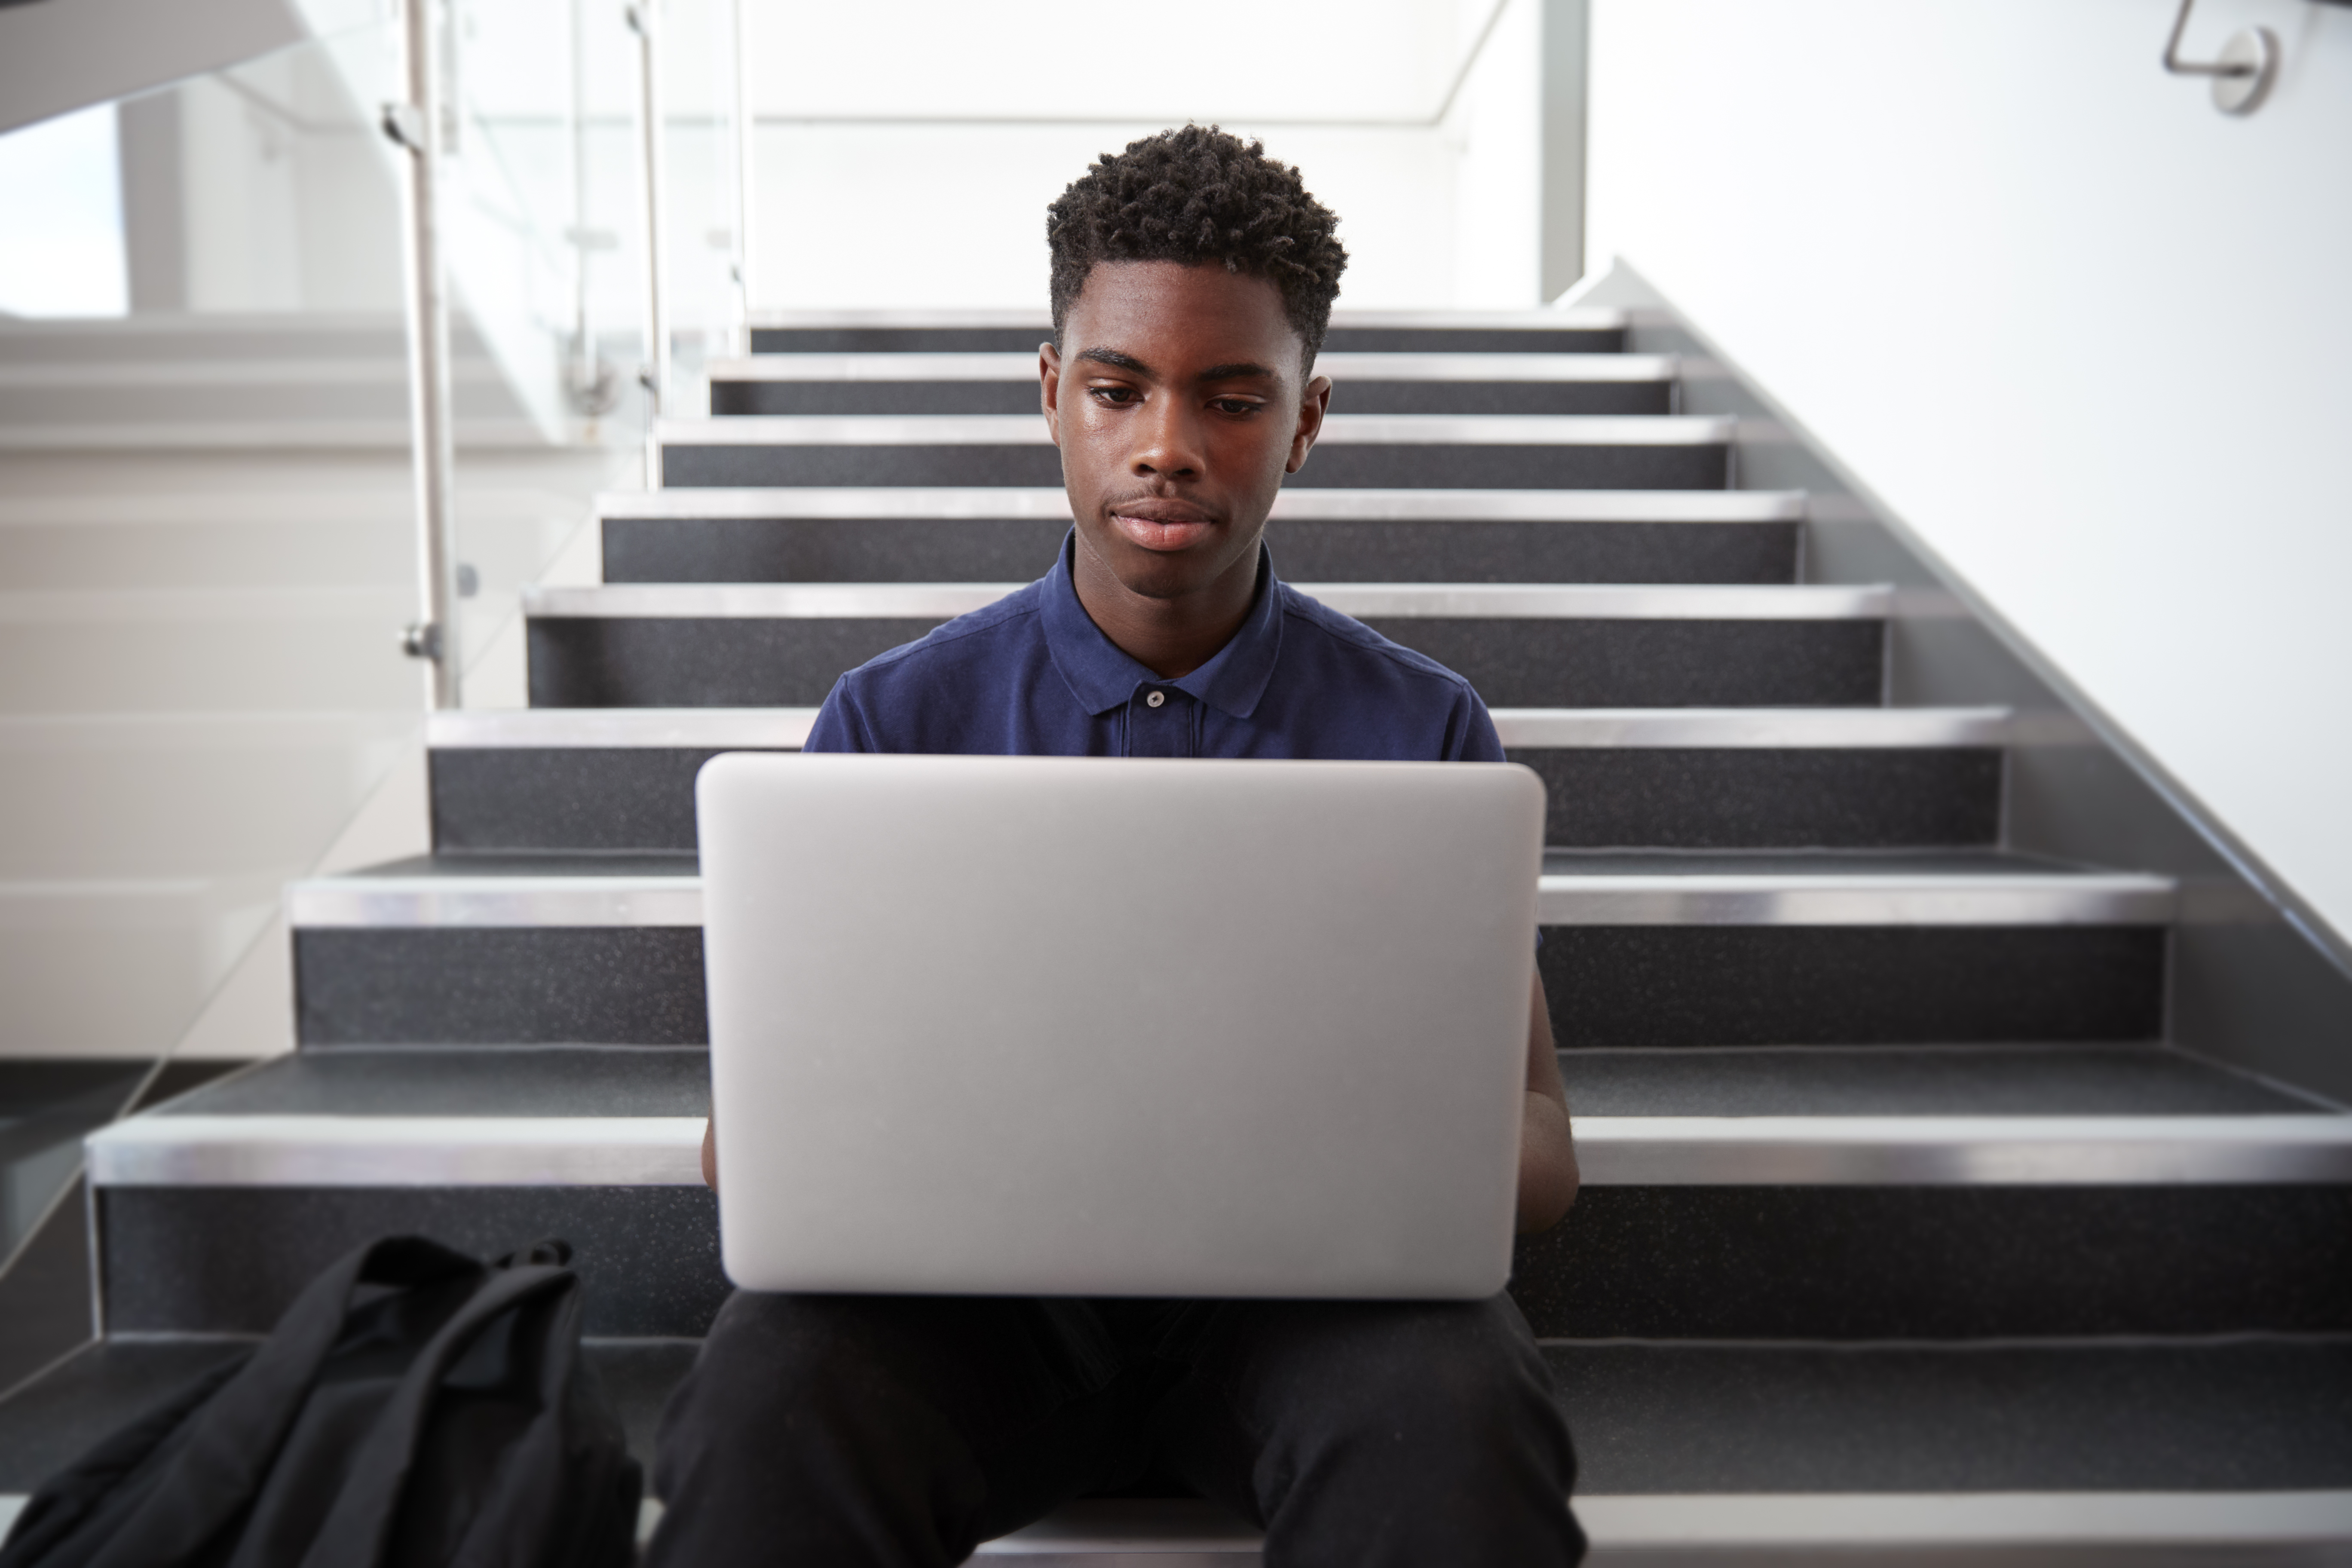 Male Student Sitting On Staircase And Using Laptop